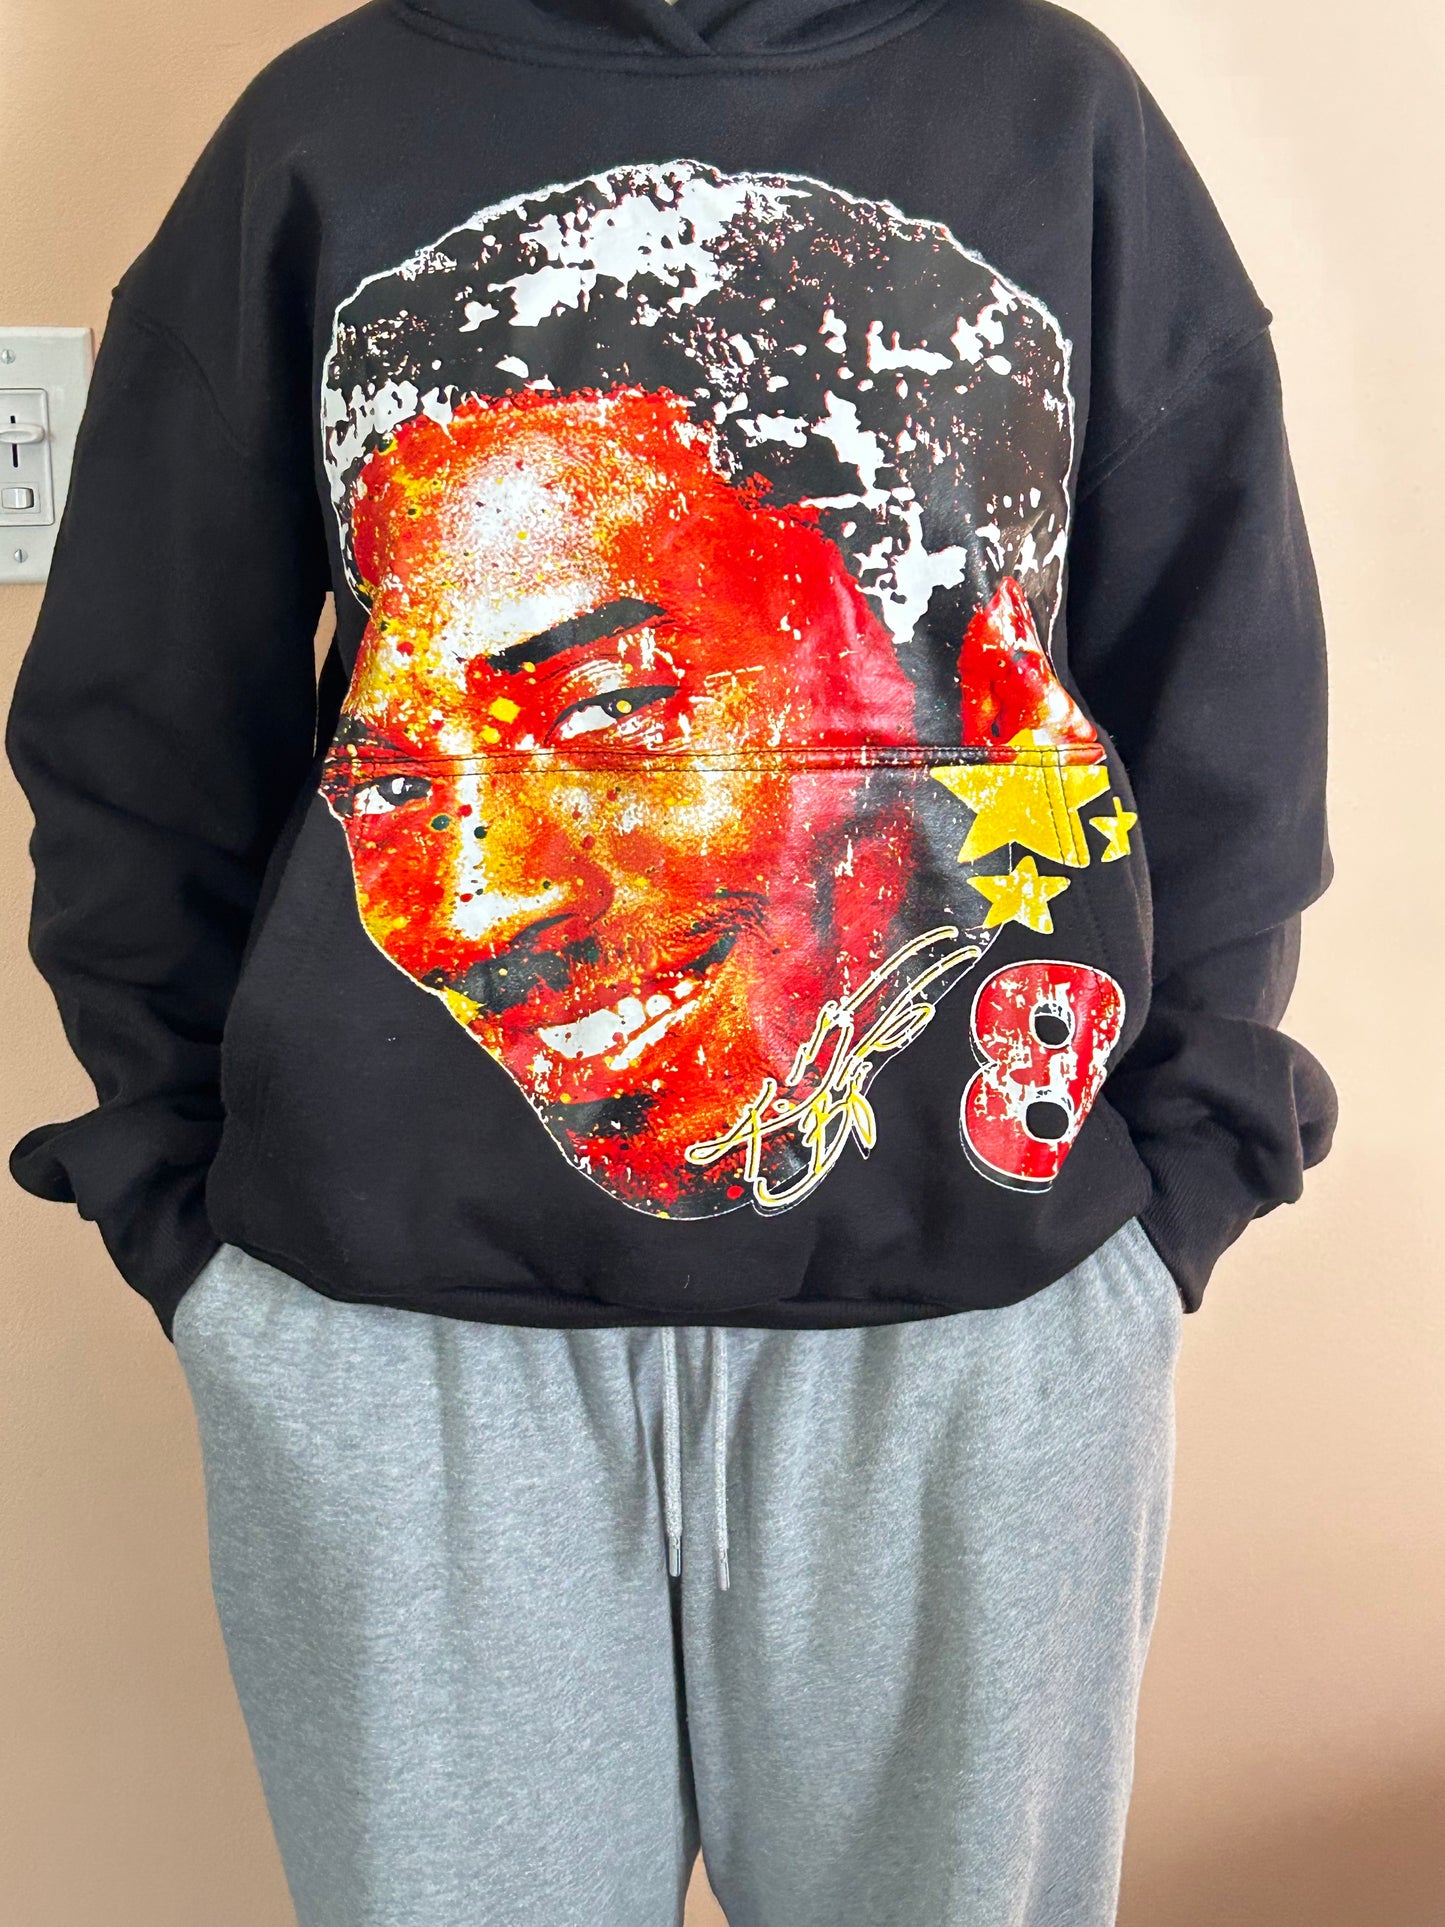 The Wrlds Yours Kobe Hoodie